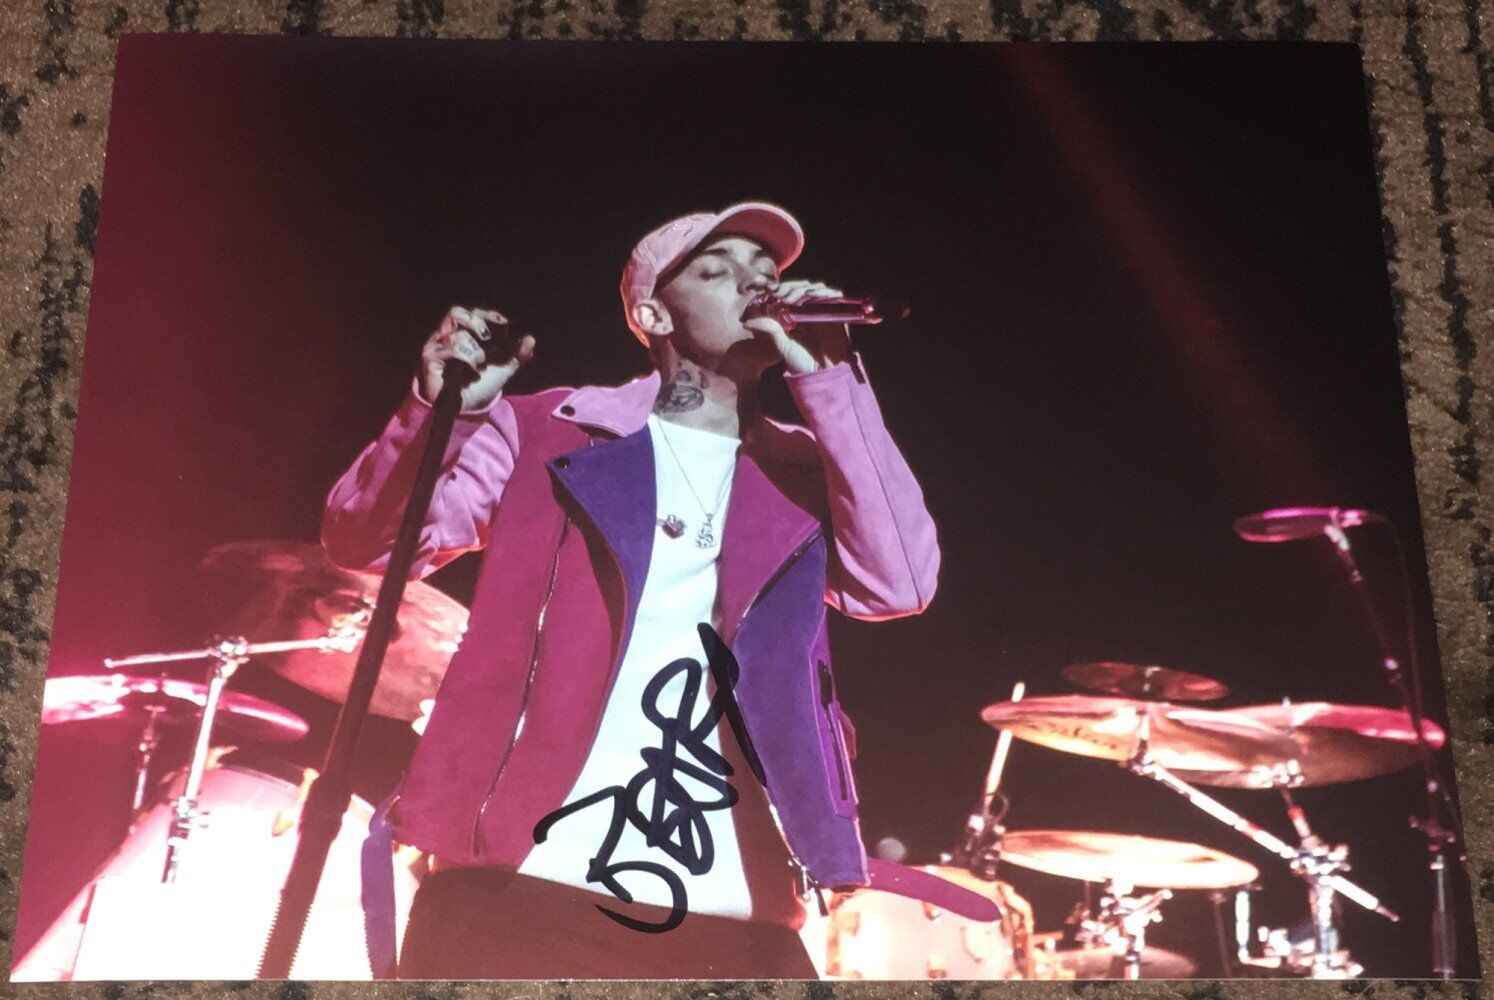 BLACKBEAR RAPPER SIGNED AUTOGRAPH 8x10 Photo Poster painting C MATTHEW MUSTO G-EAZY wEXACT PROOF